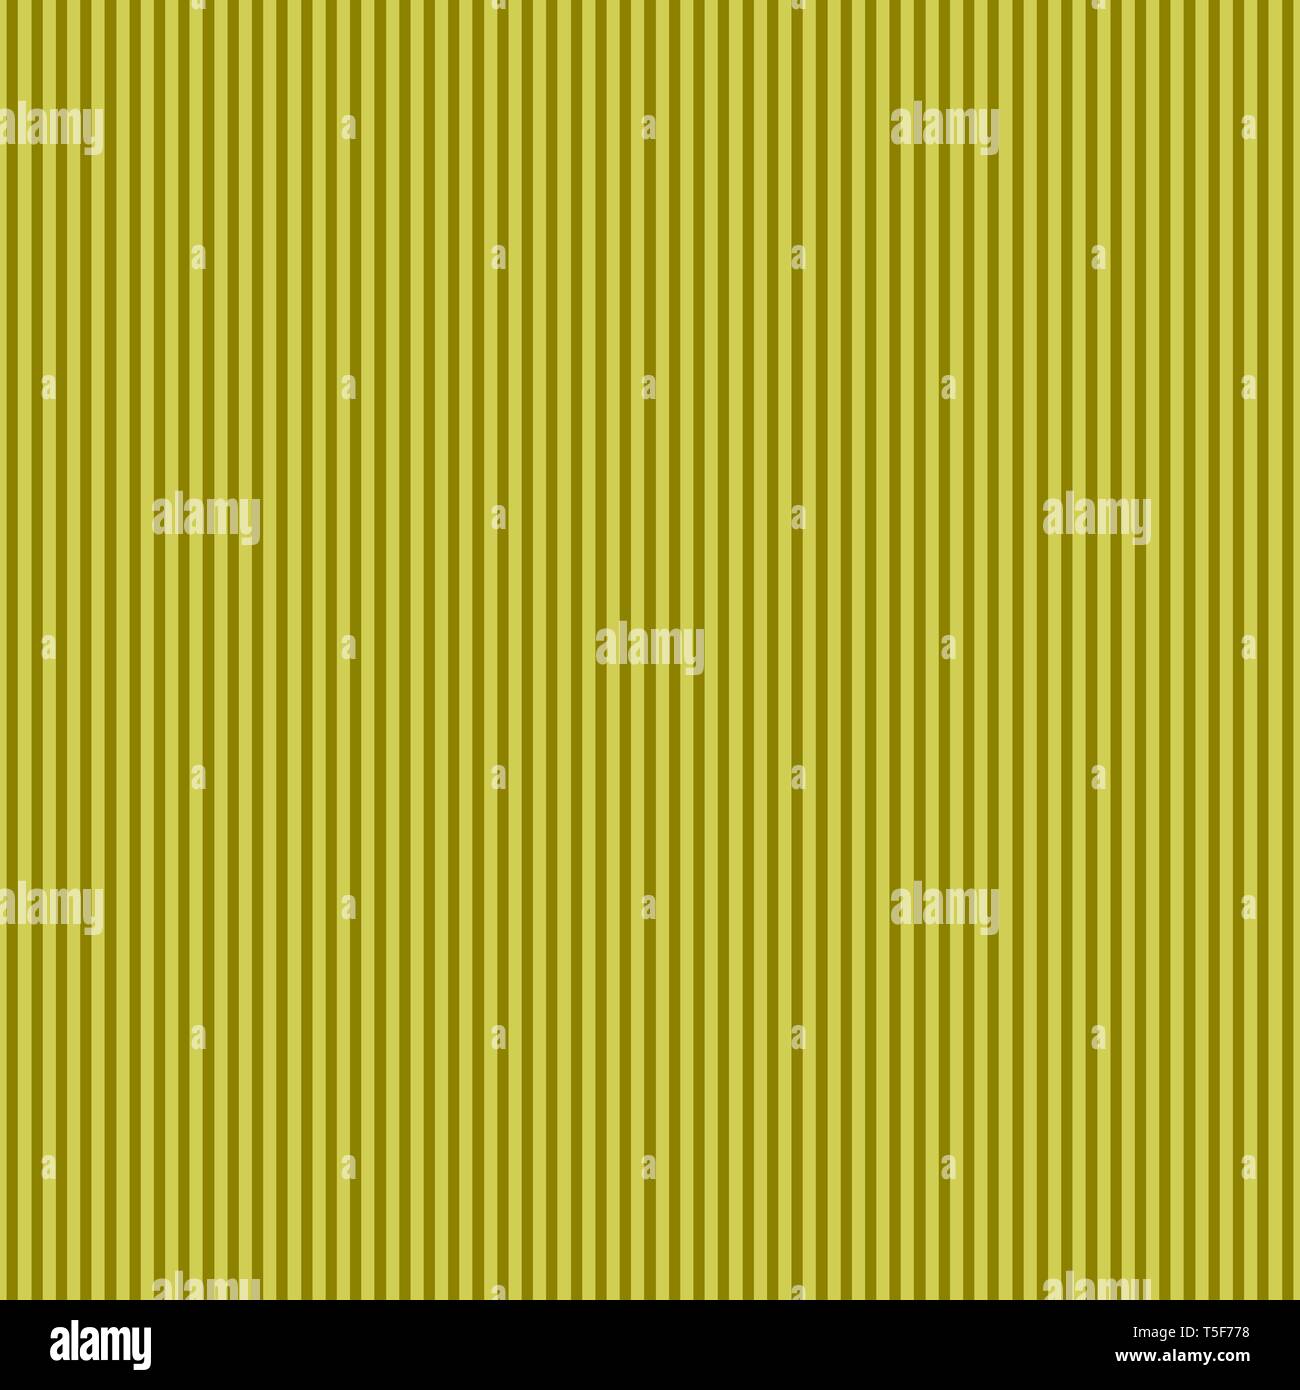 Vertical stripes pattern, seamless texture lines background Stock Vector